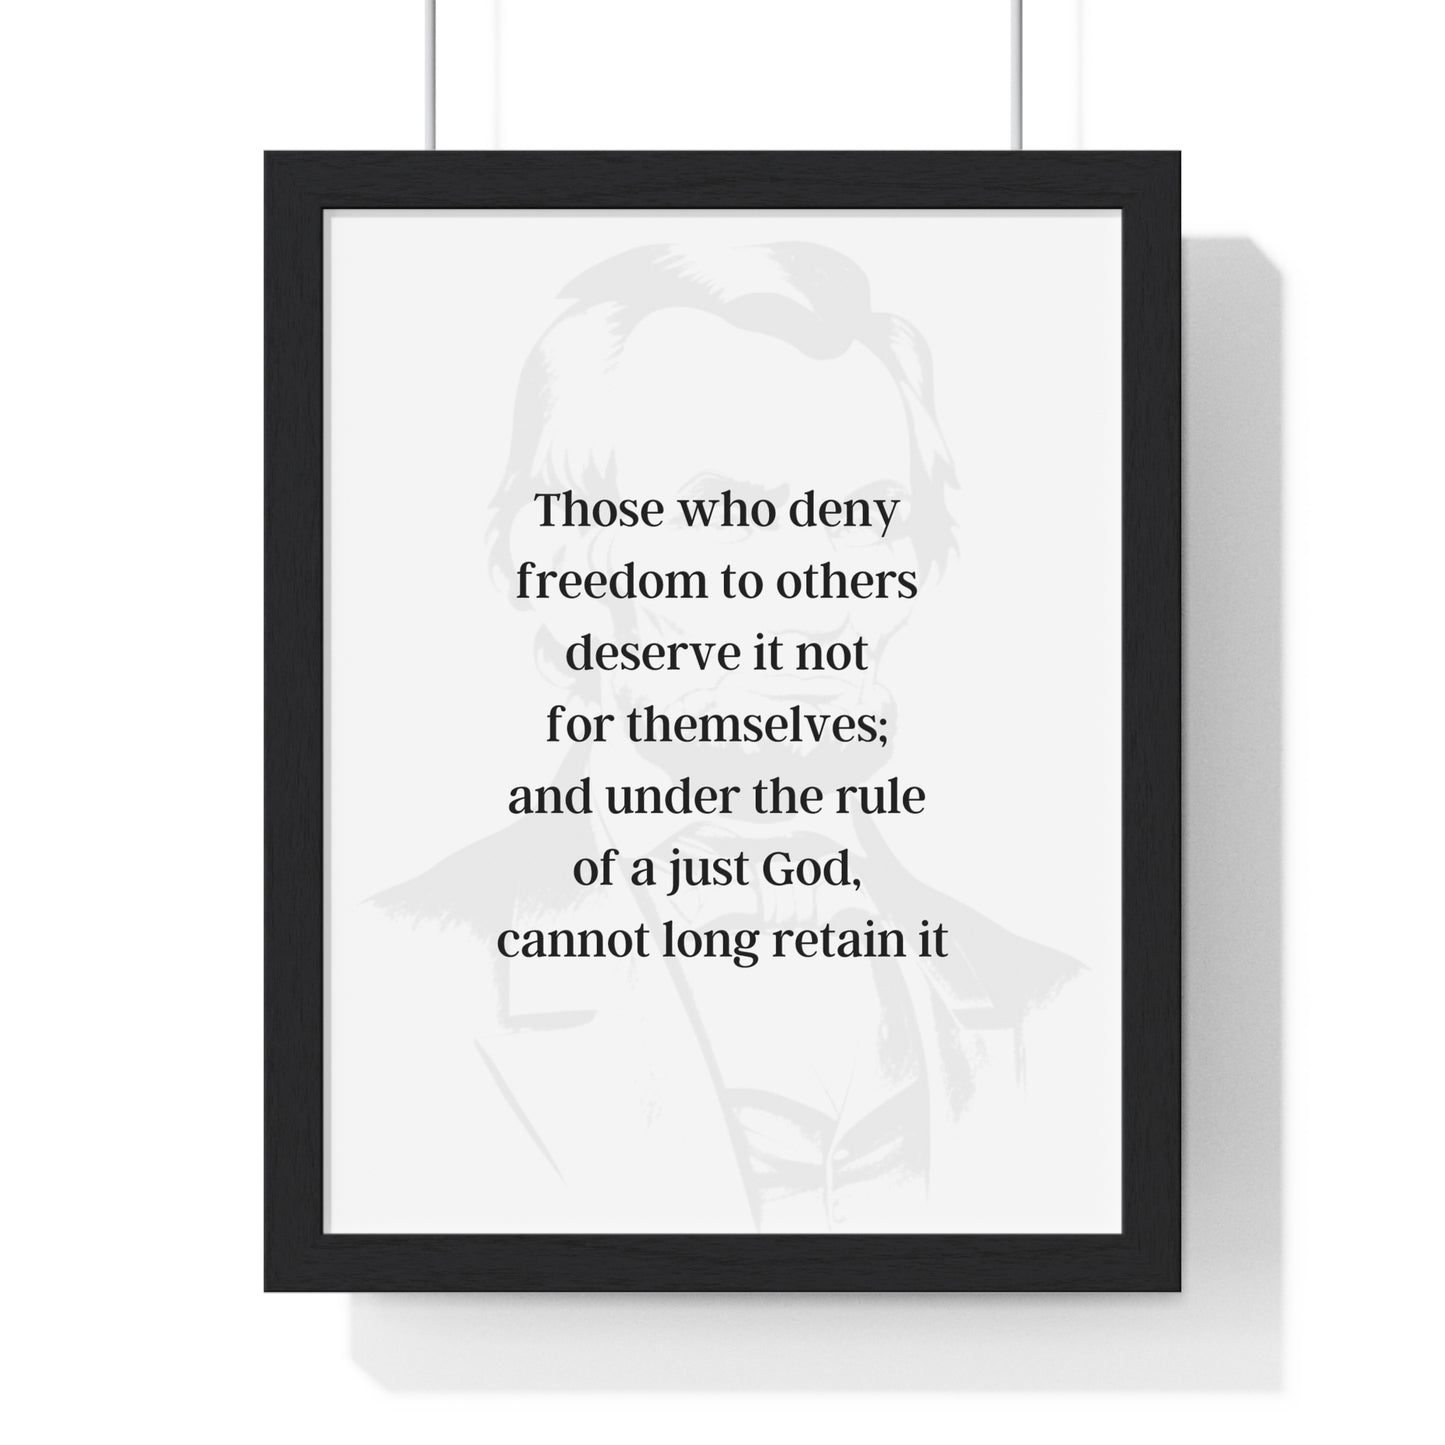 Abraham Lincoln Quote 8, Poster Art, Light Print with Dark Lettering, 16th President of the United States, American Patriots, AI Art, Political Art, Poster Prints, Presidential Portraits, Presidential Quotes, Inspirational Quotes